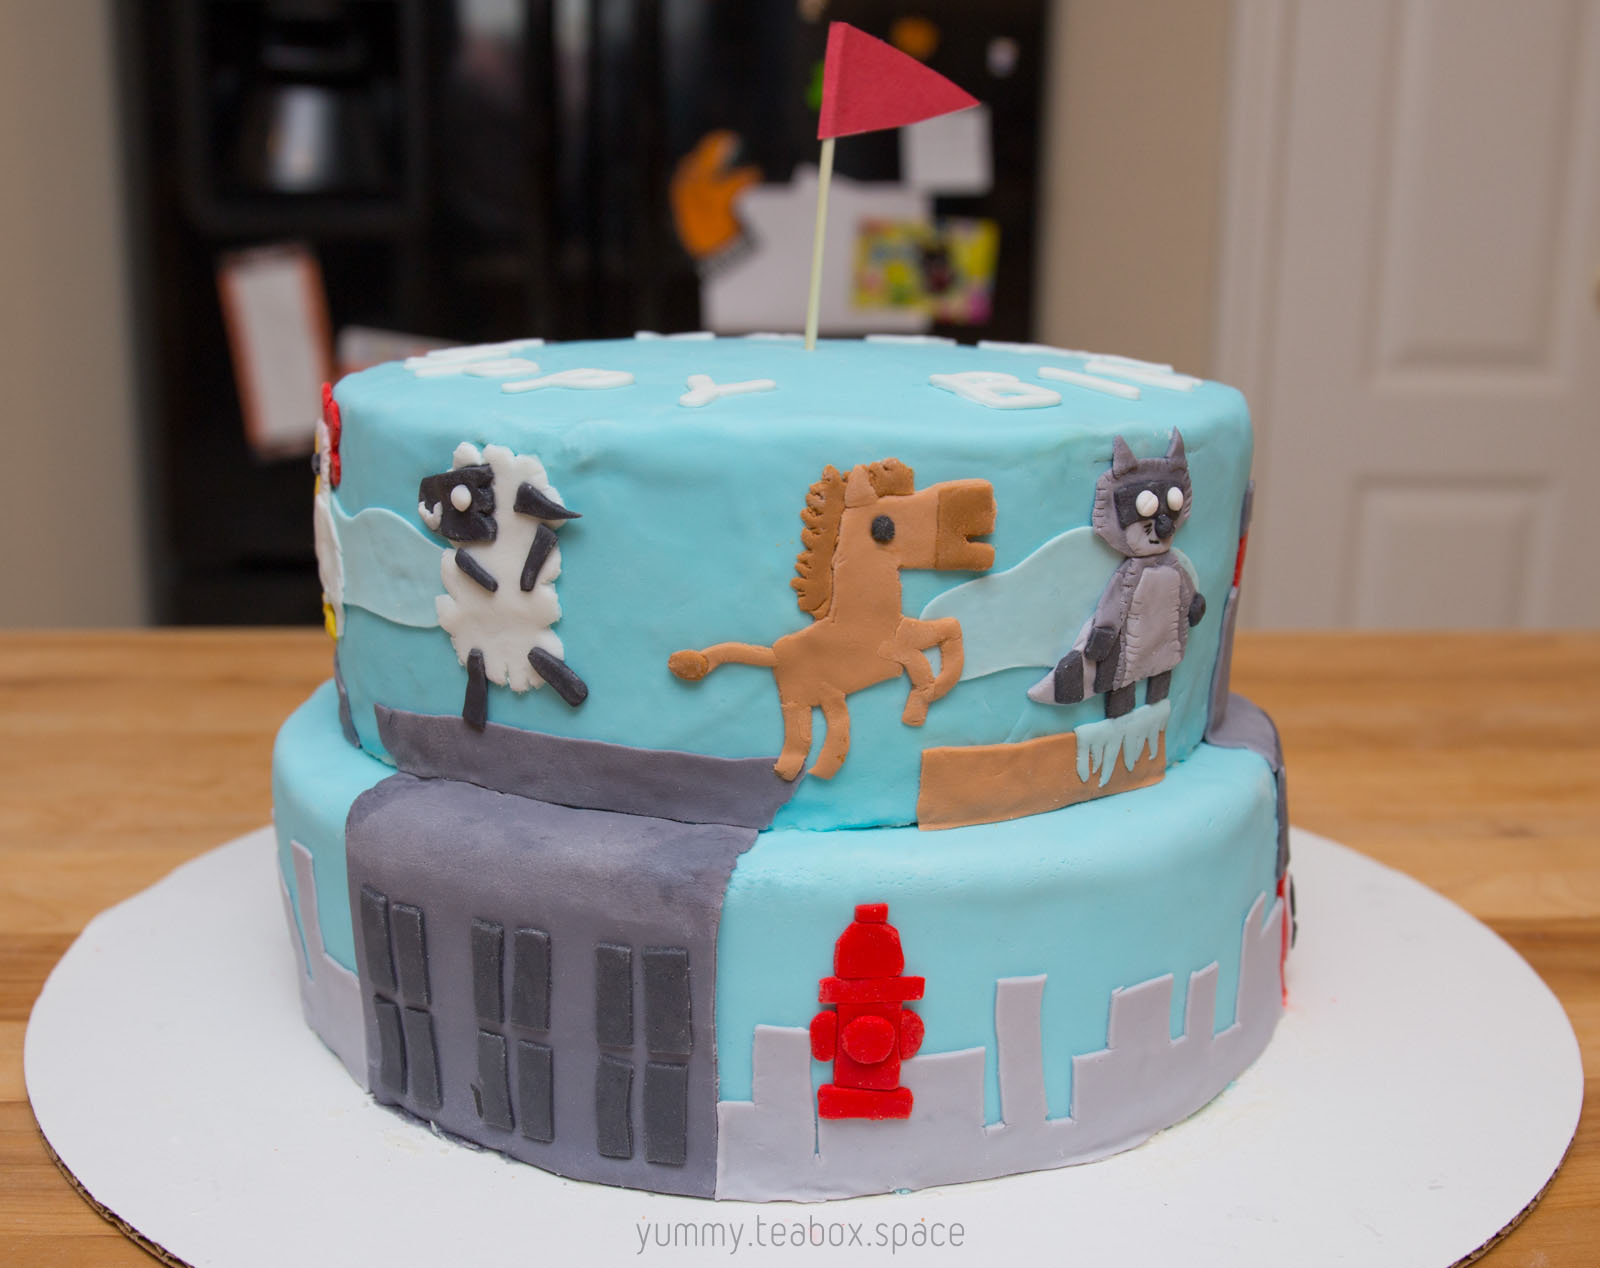 2-tier blue cake with images of sheep, horse, and raccoon from Ultimate Chicken Horse on the side.